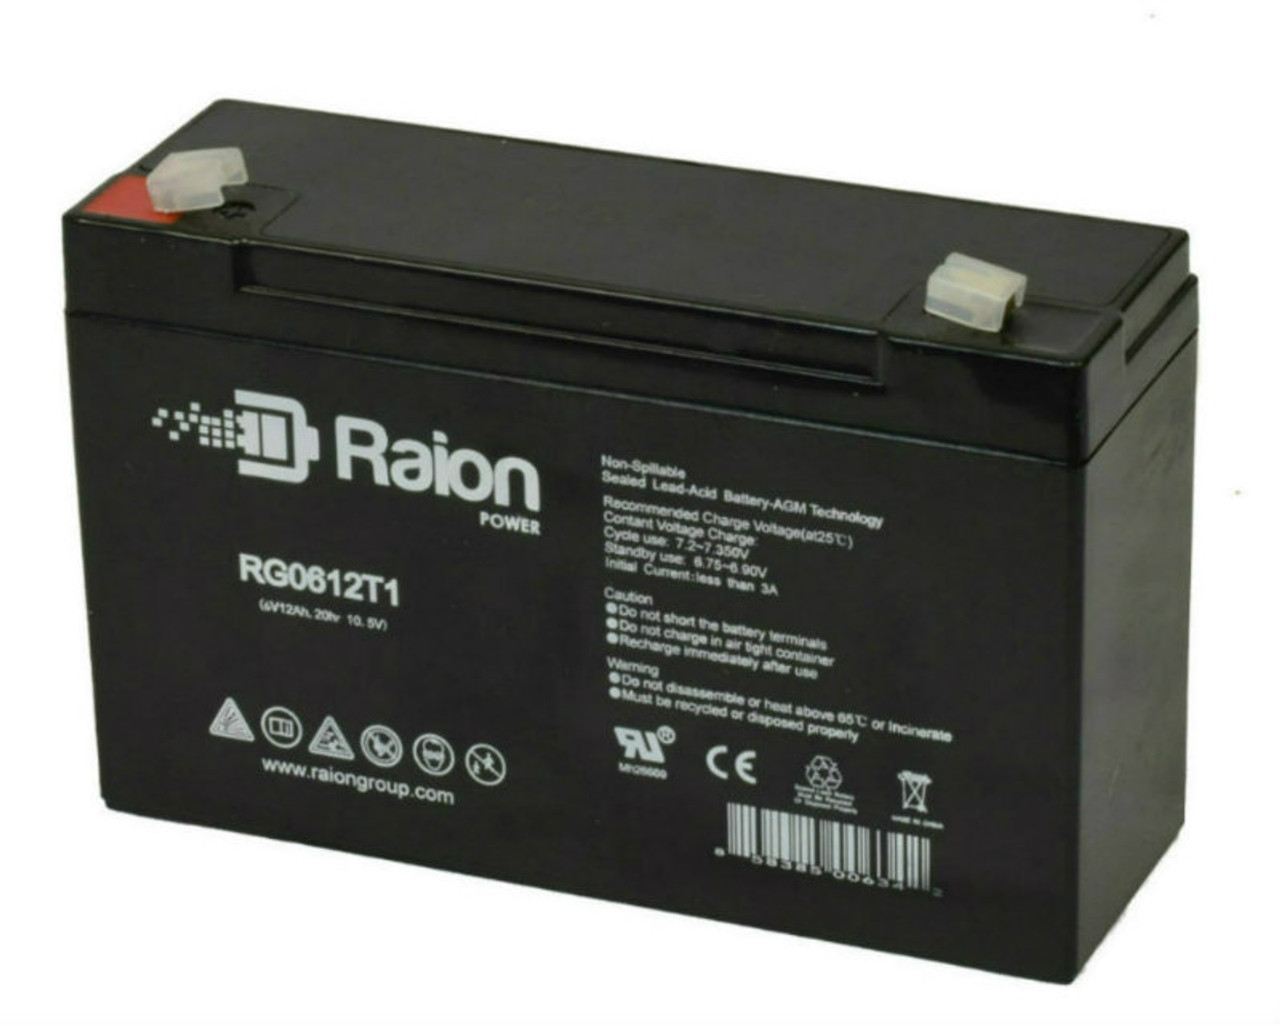 Raion Power RG06120T1 Replacement Emergency Light Battery for Lithonia CF1822